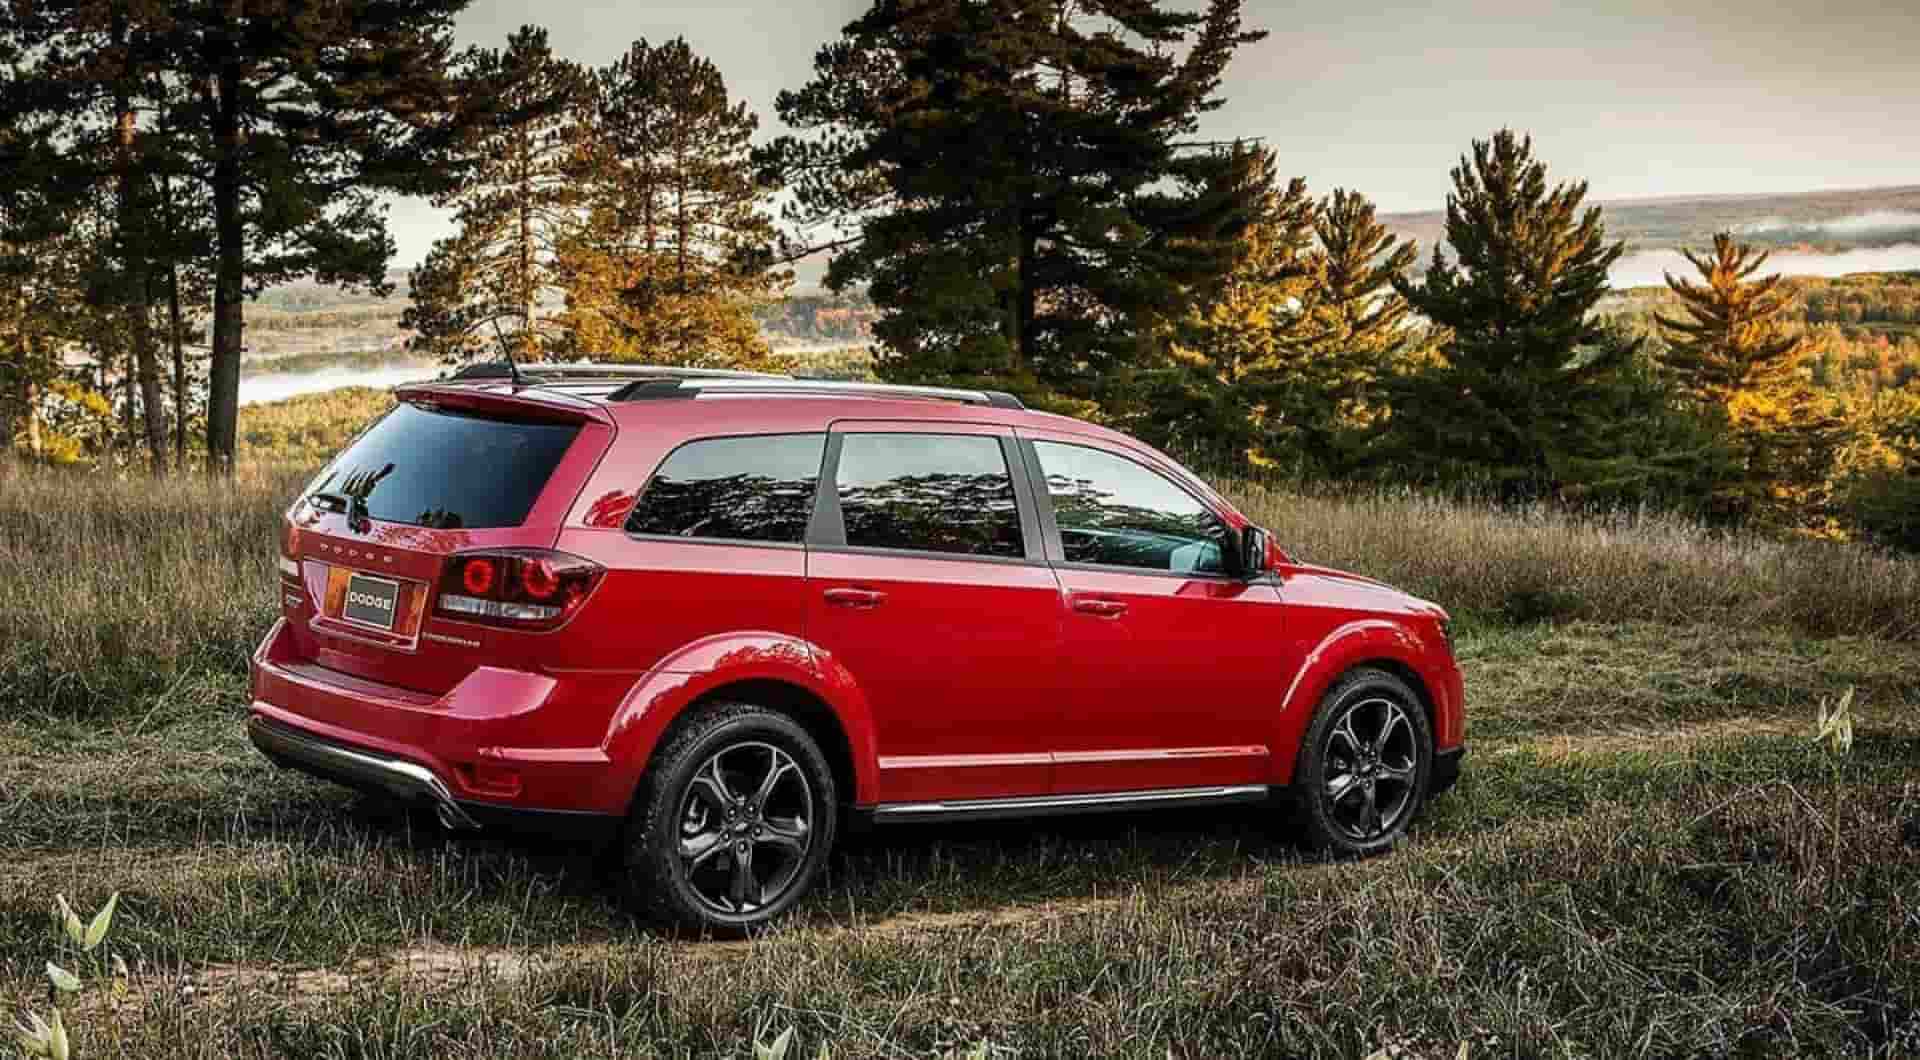 What's new with the 2019 Dodge Journey near Junction City KS